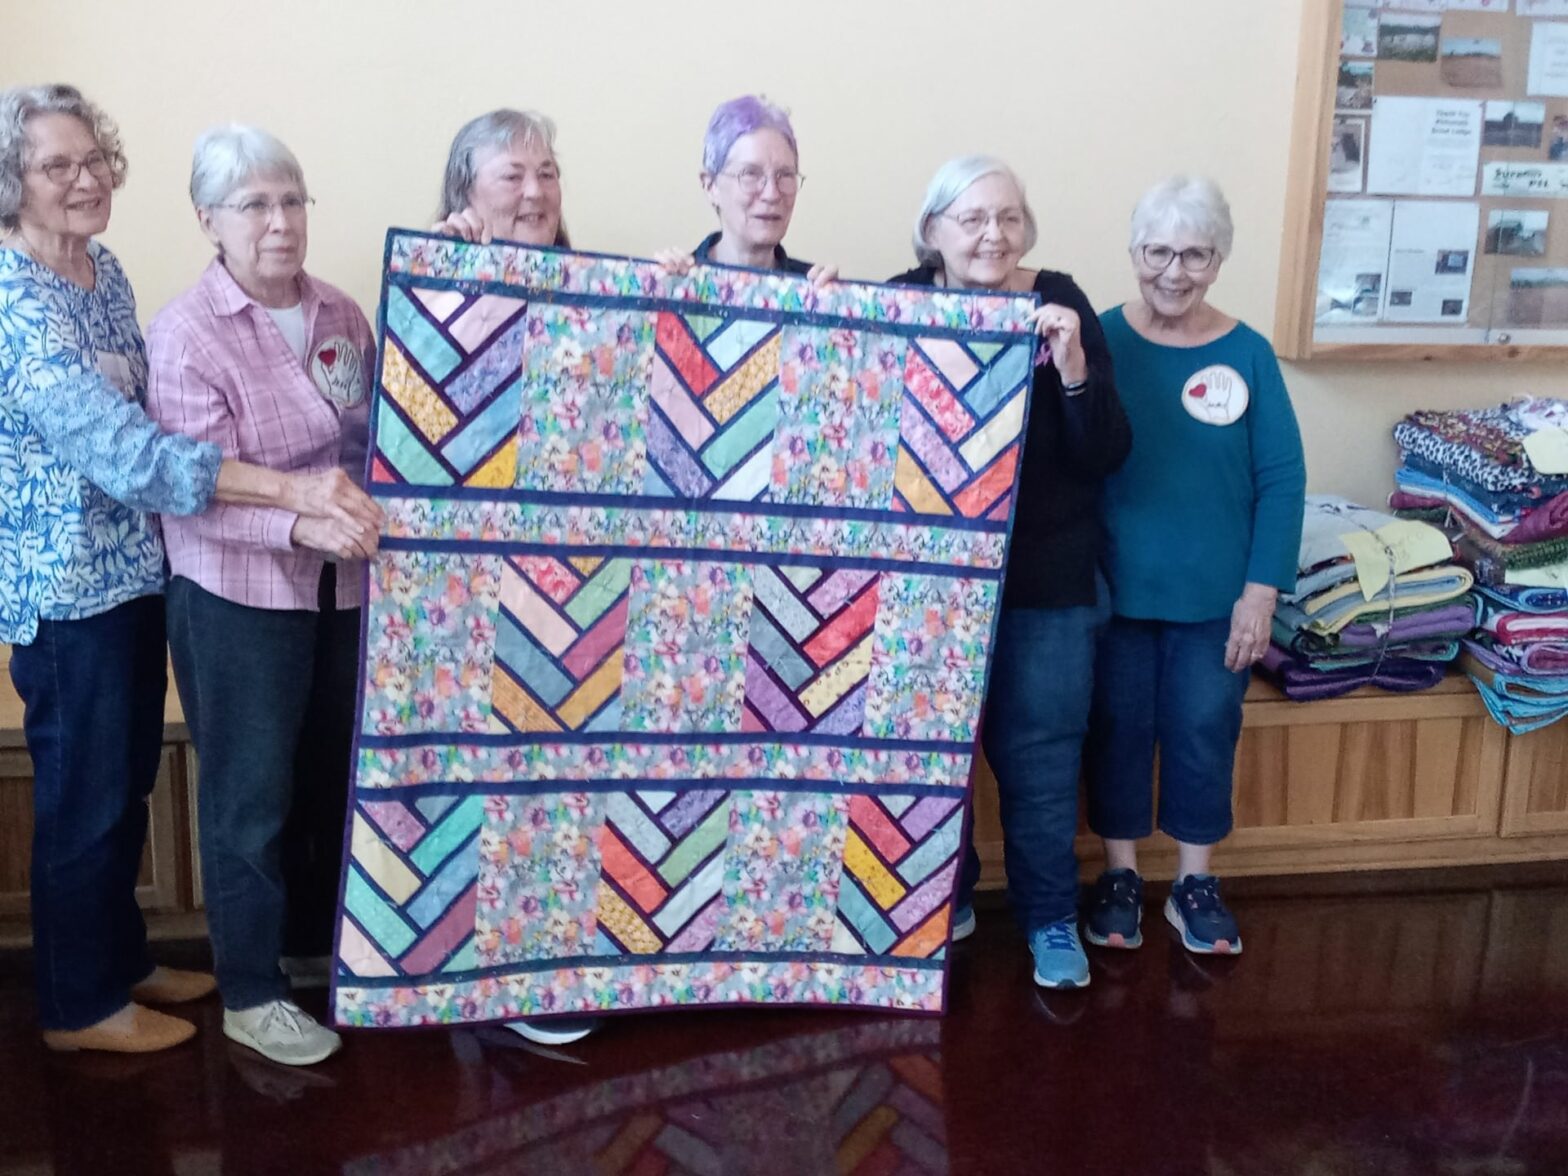 Members of Quilts from Caring Hands holding up a quilt.